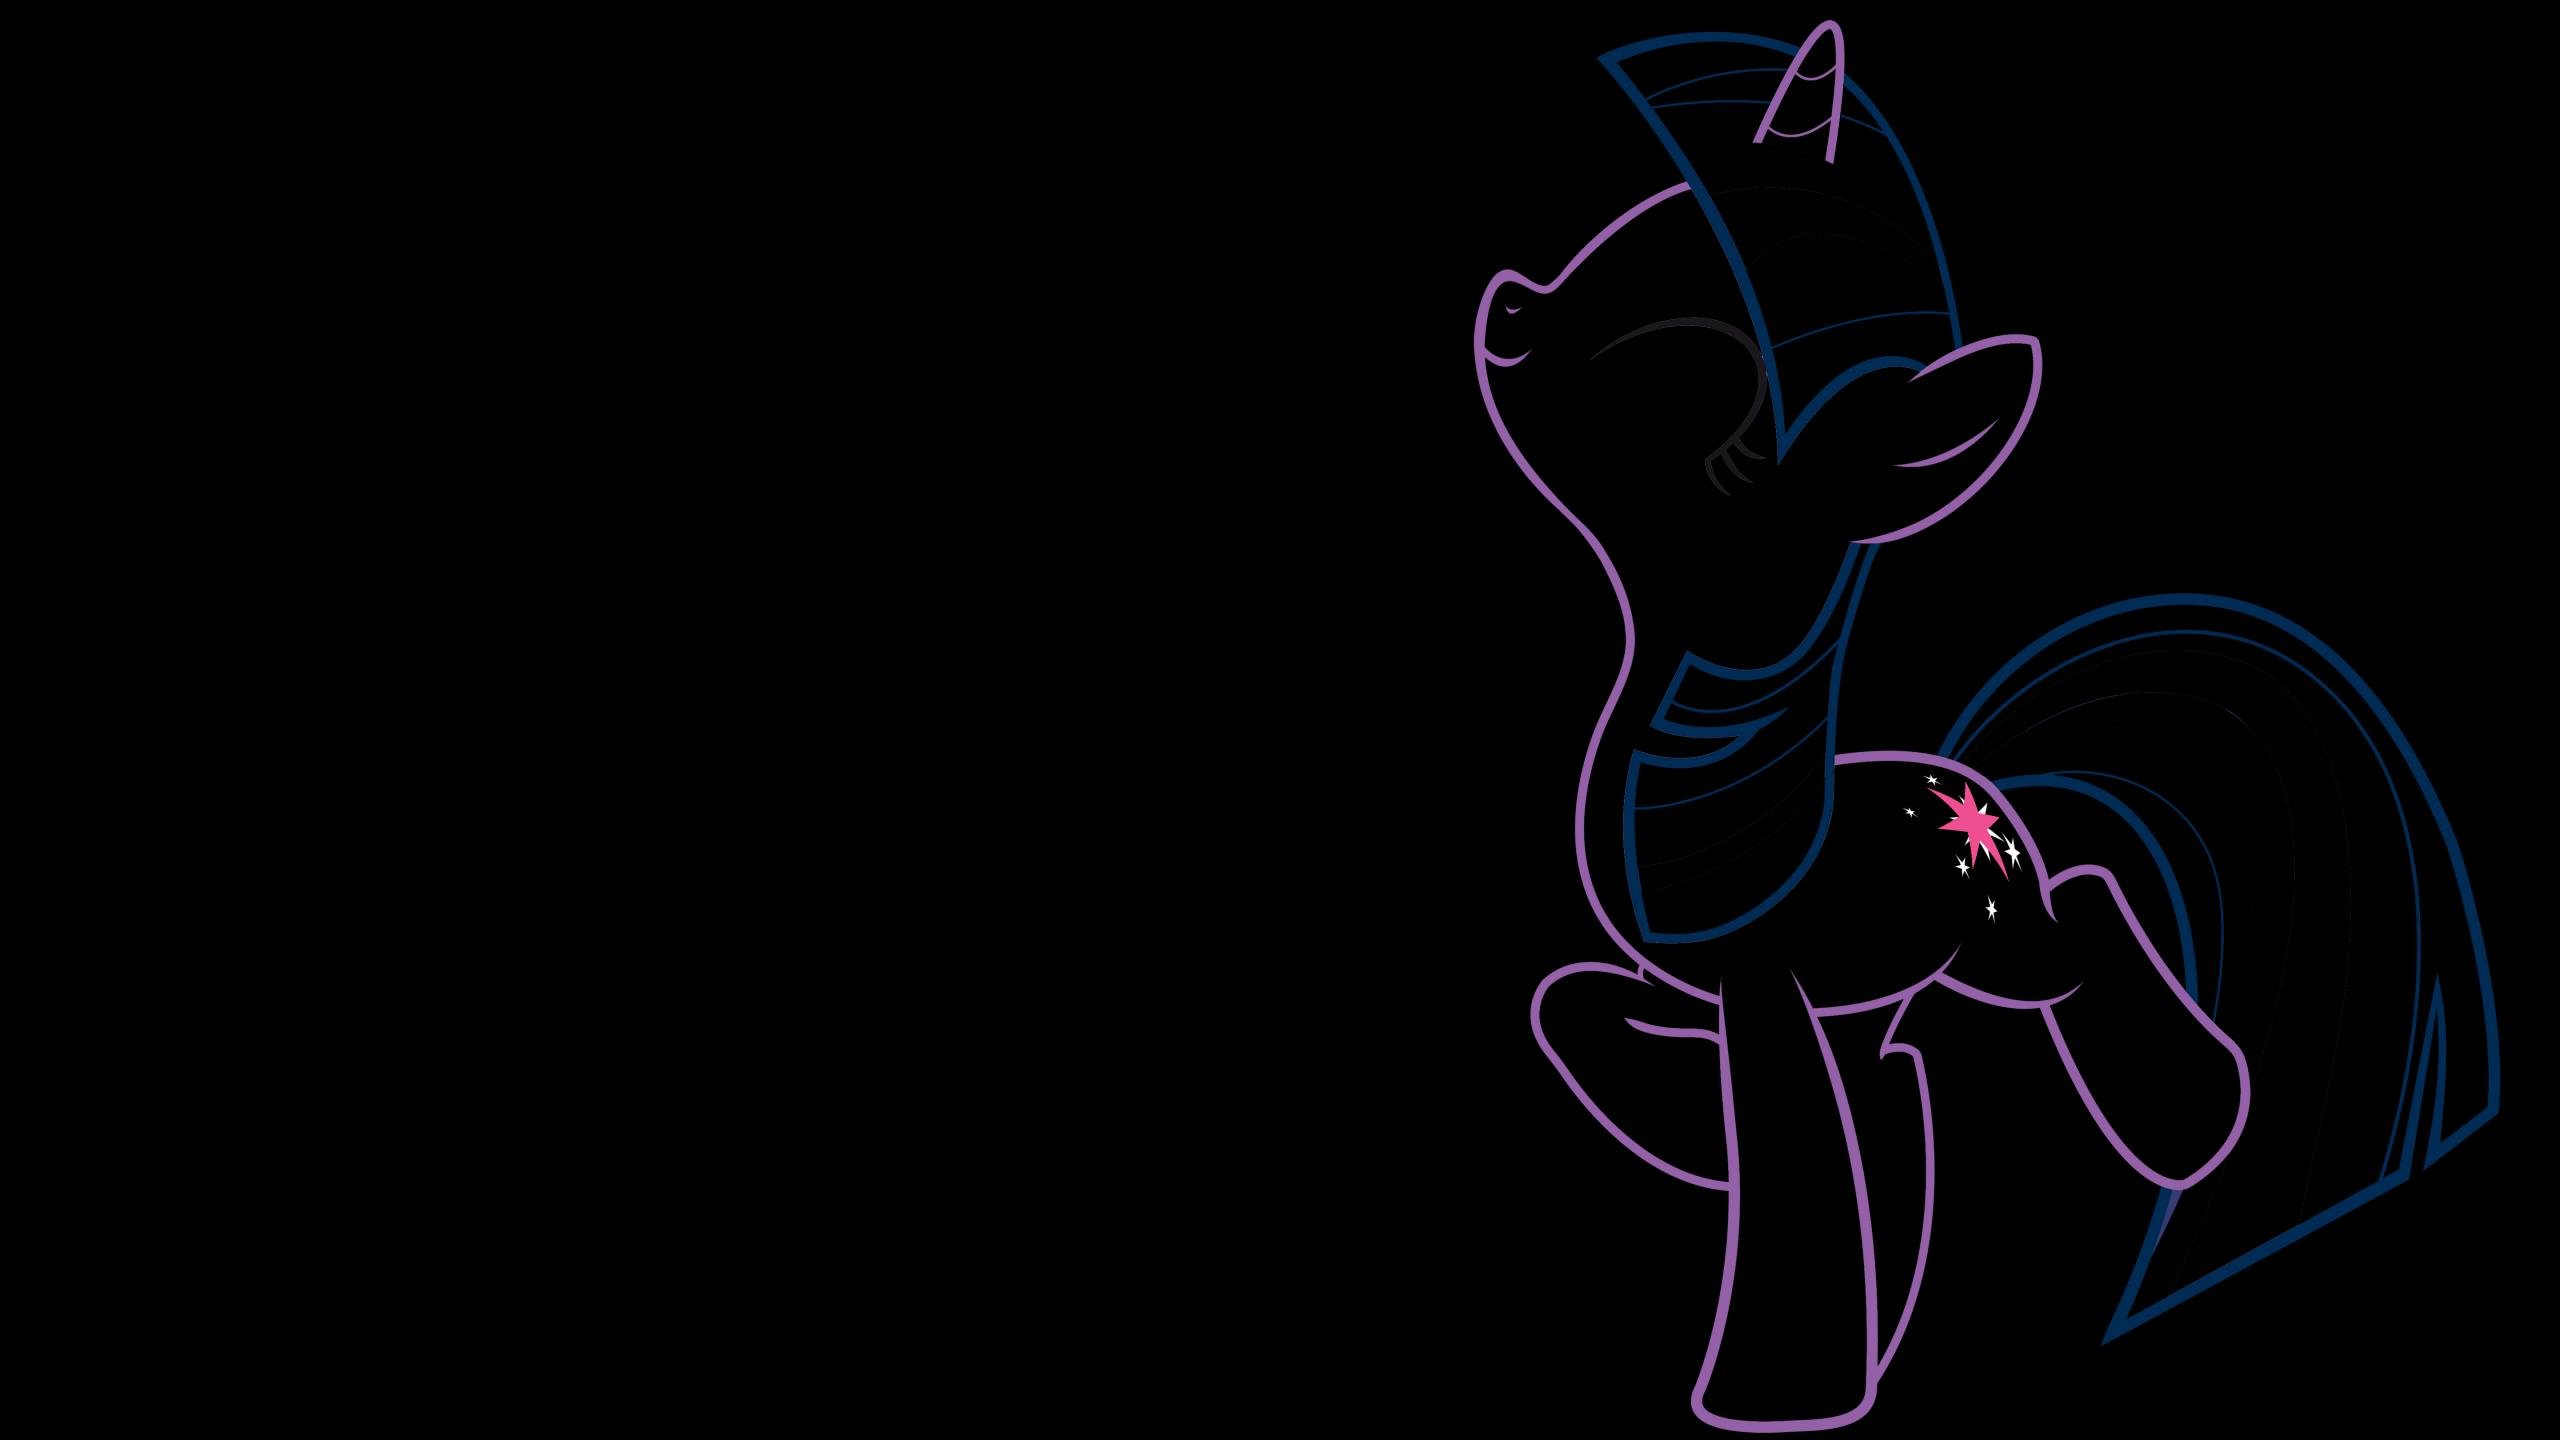 My Little Pony (MLP) wallpapers